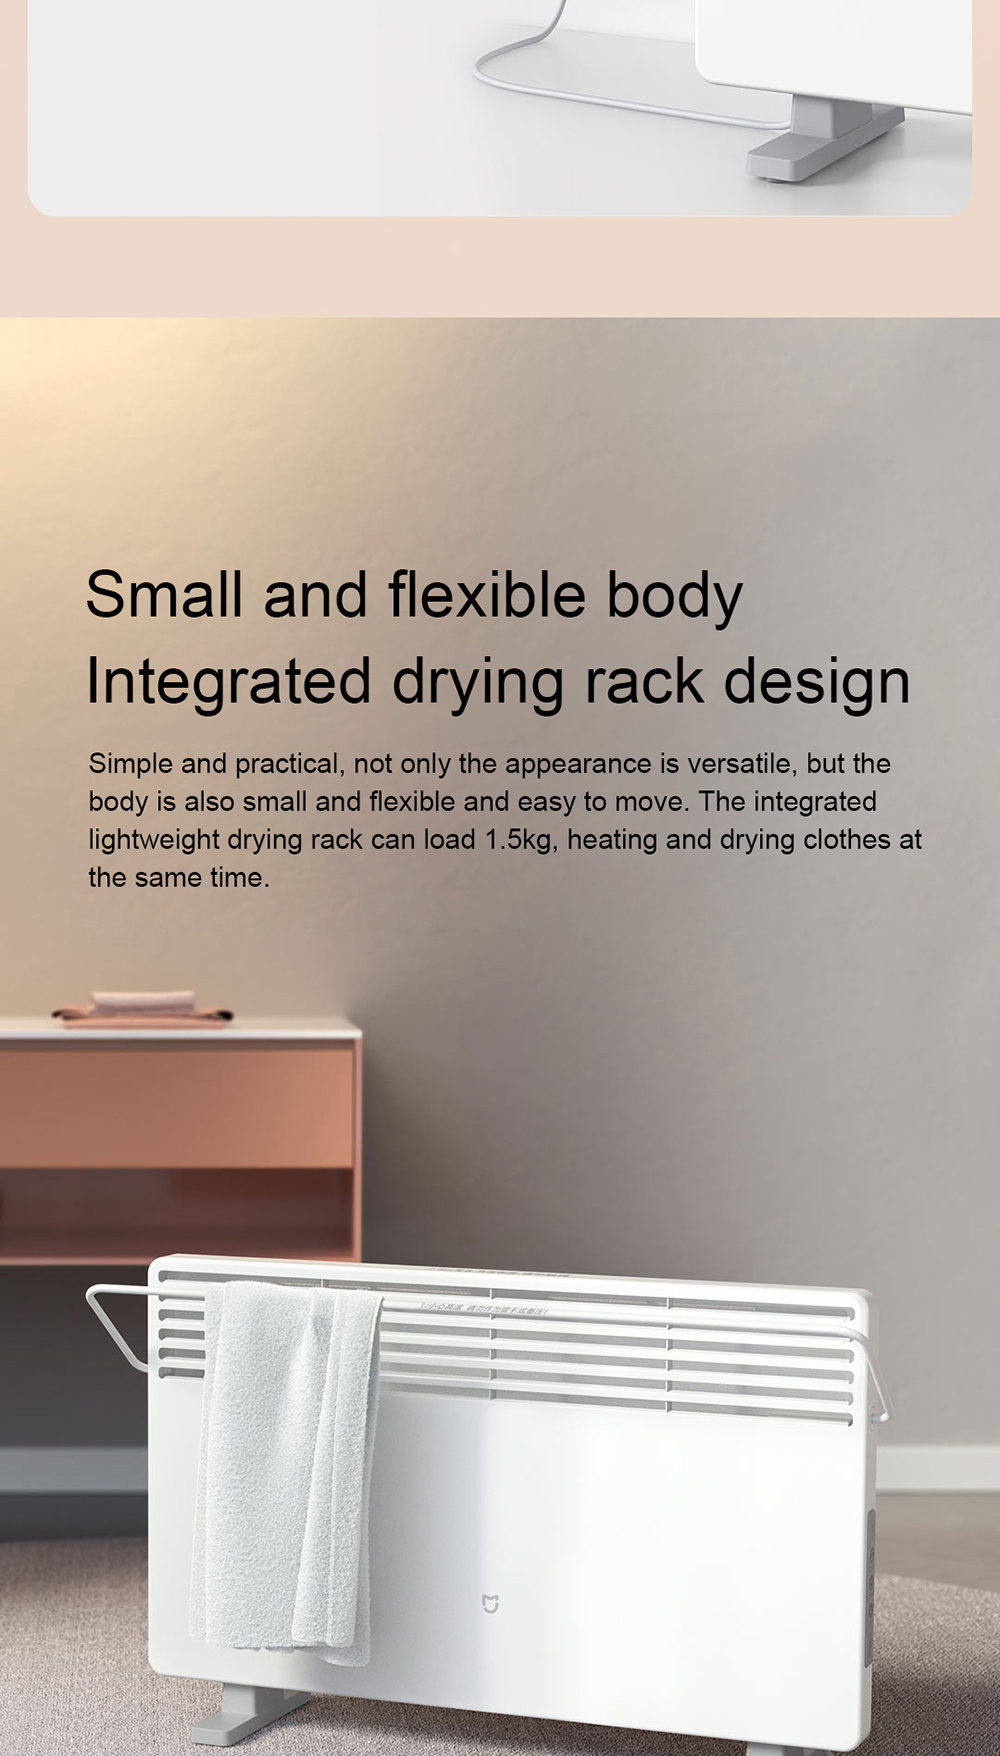 Small and flexible body Integrated drying rack design